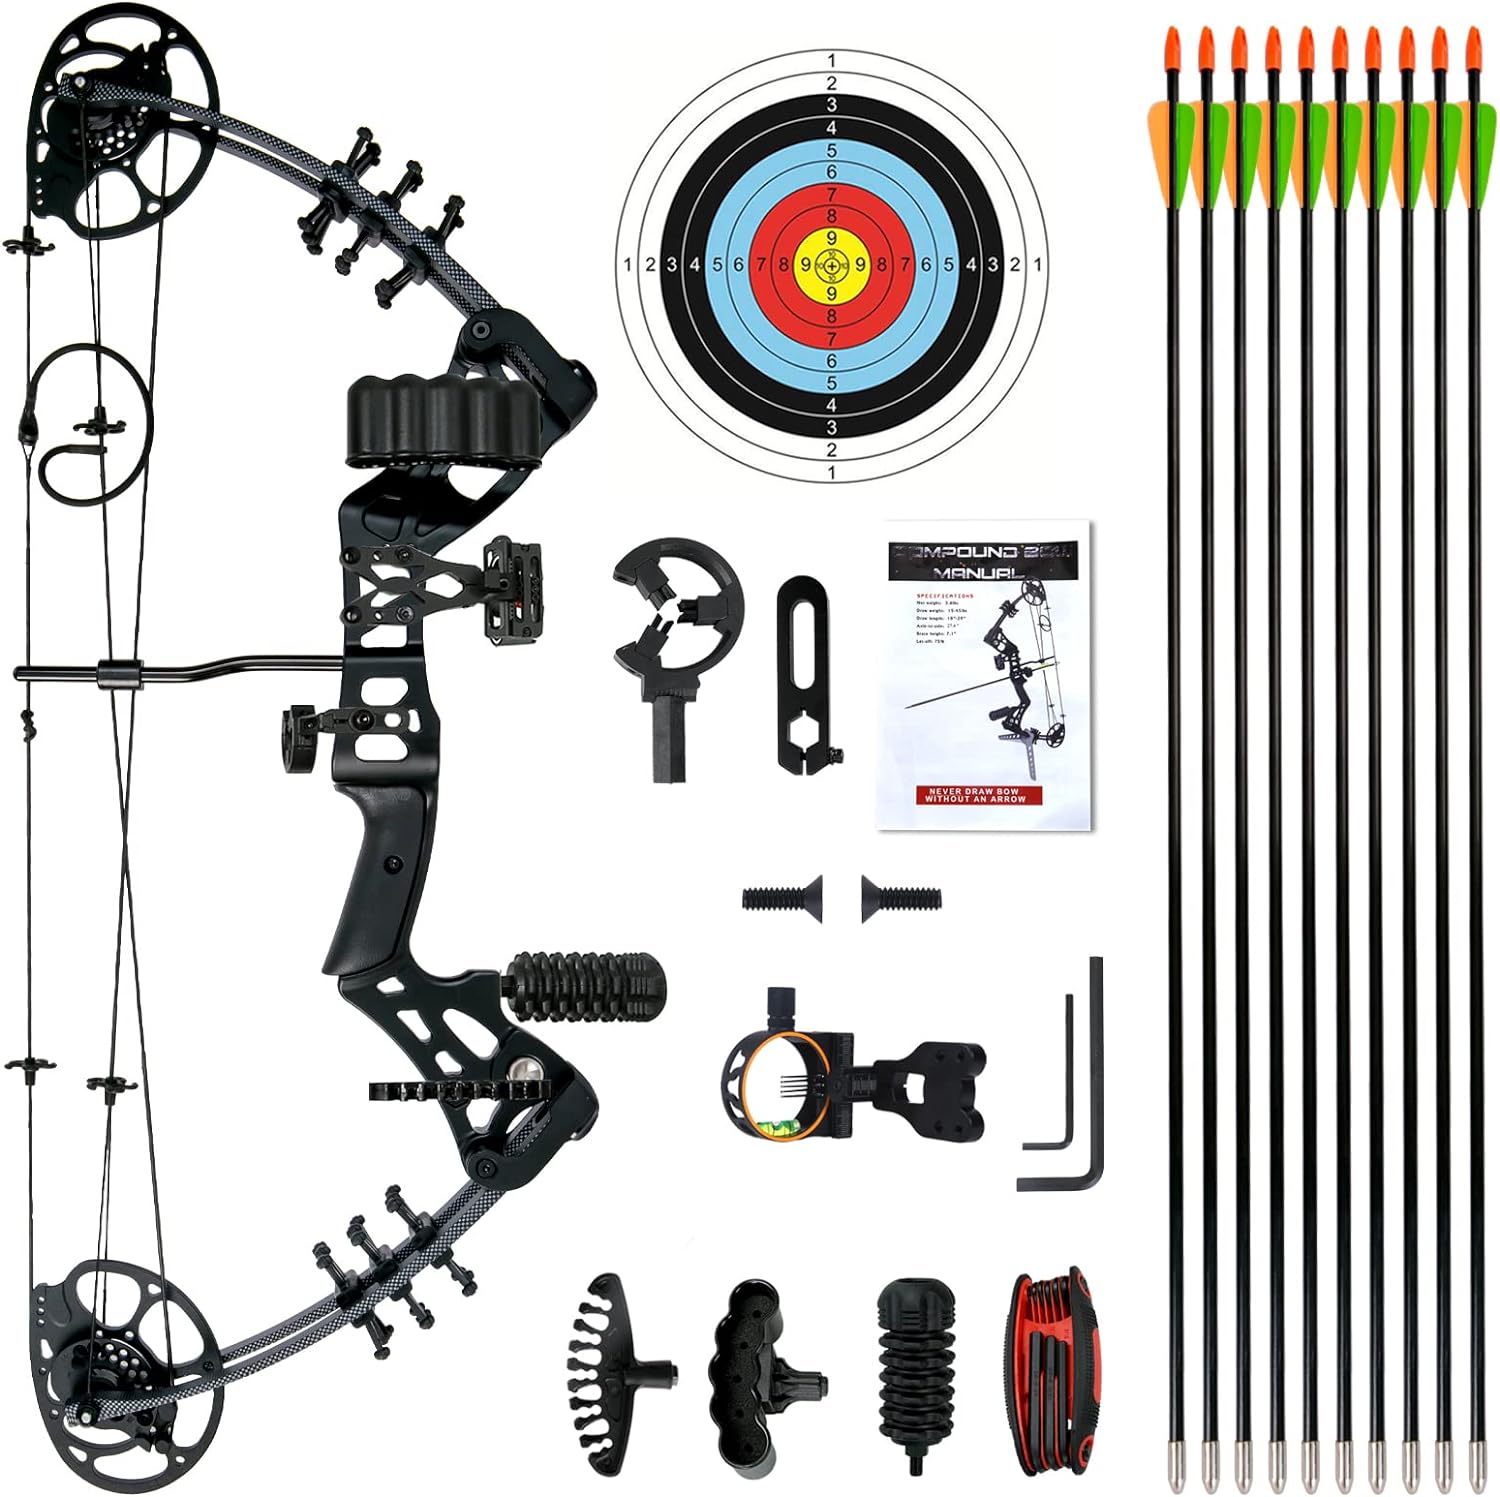 WUXLISTY's Youth Compound Bow Set offers comprehensive features that elevate the archery experience for teens and beginners.